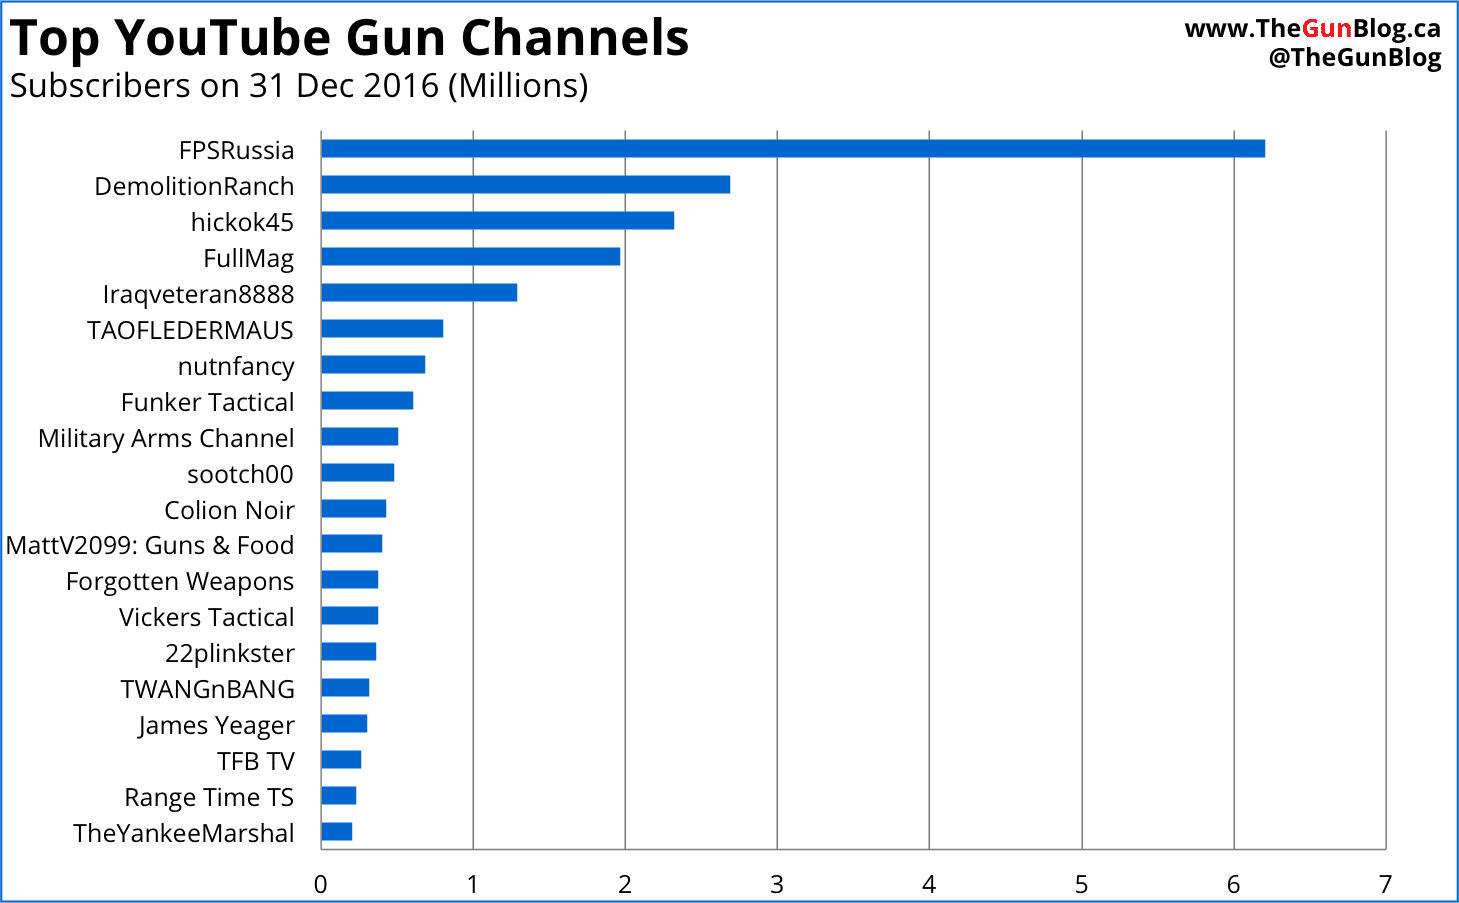 Top YouTube Gun Channels by Subscribers